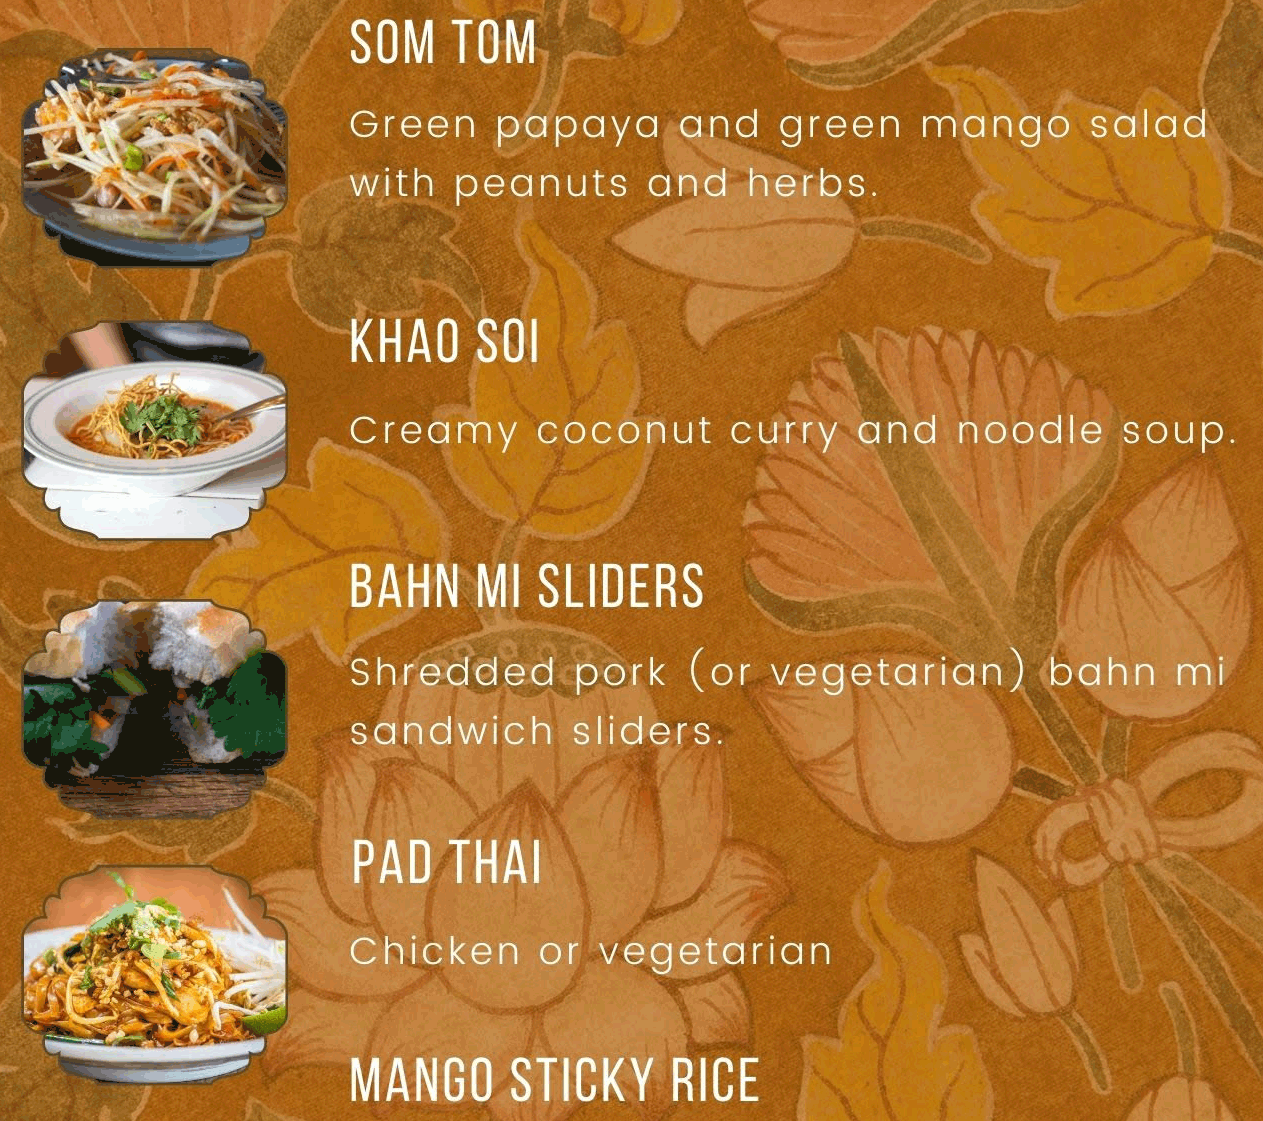 Thursday, November 5th...Taste of Thai.  PICK UP BETWEEN 4 PM and 5 PM.